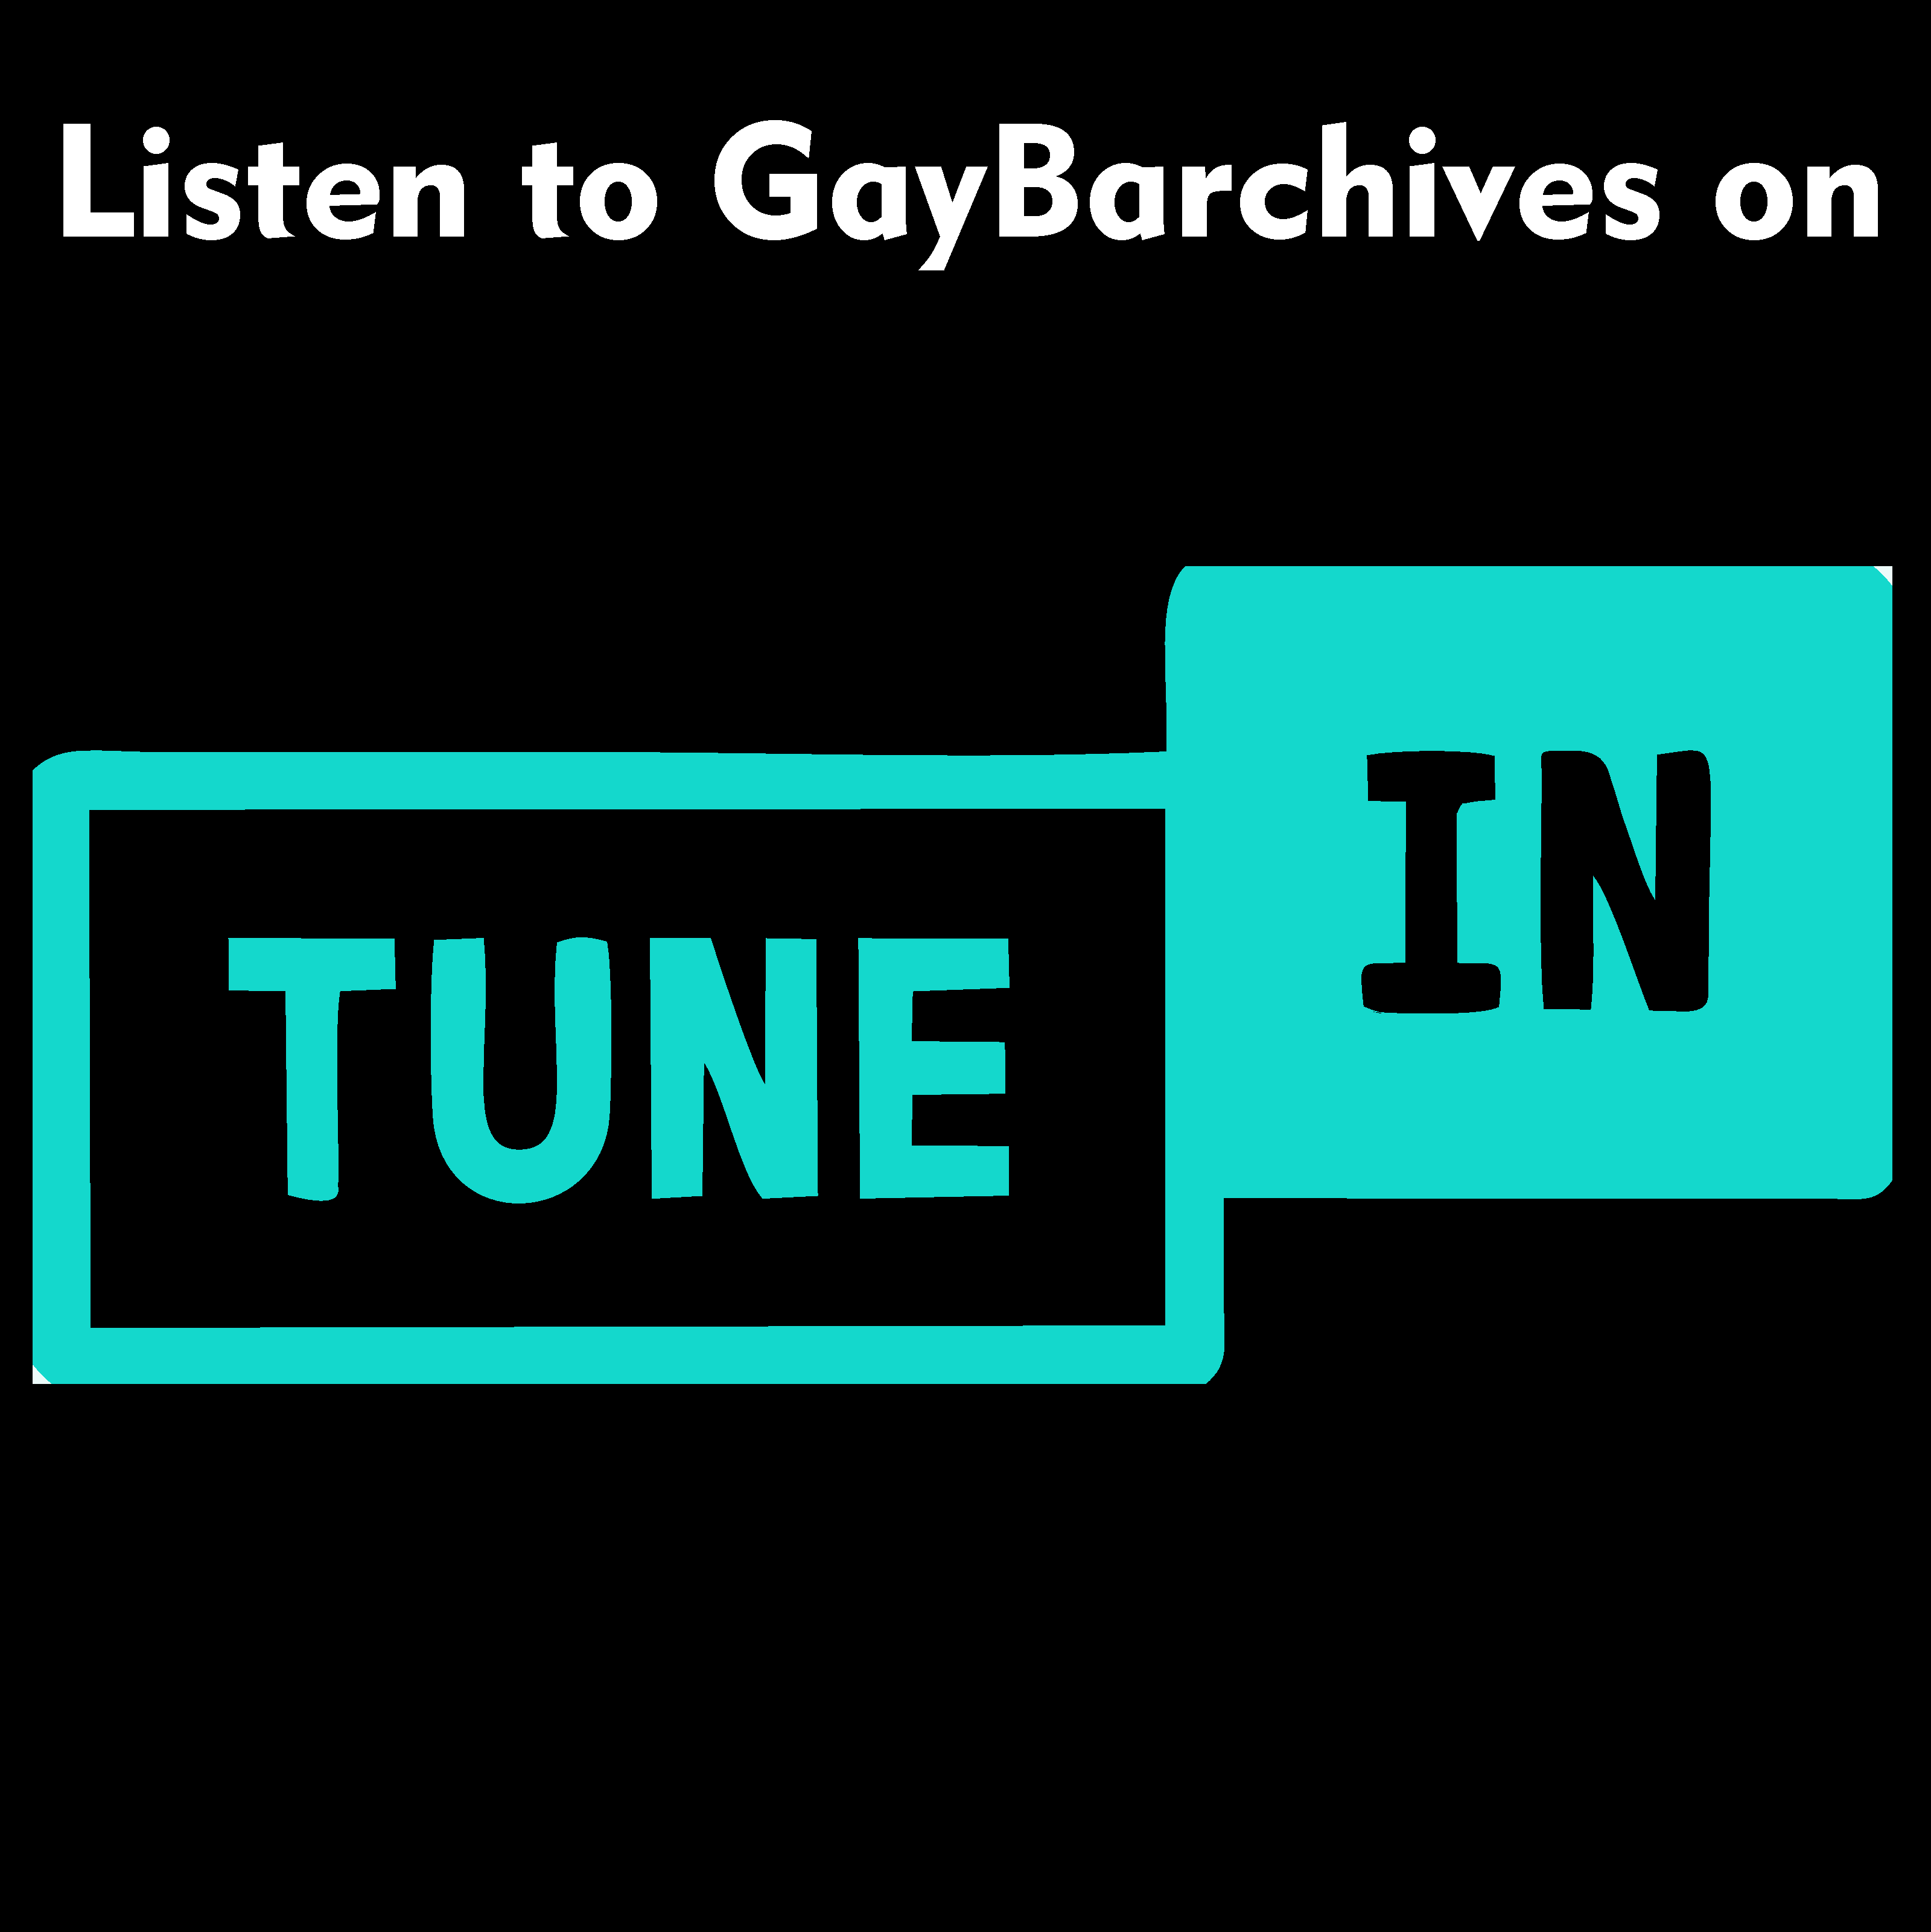 Listen to the #GayBarchives podcast on Tune-In. #ilovegaybars 